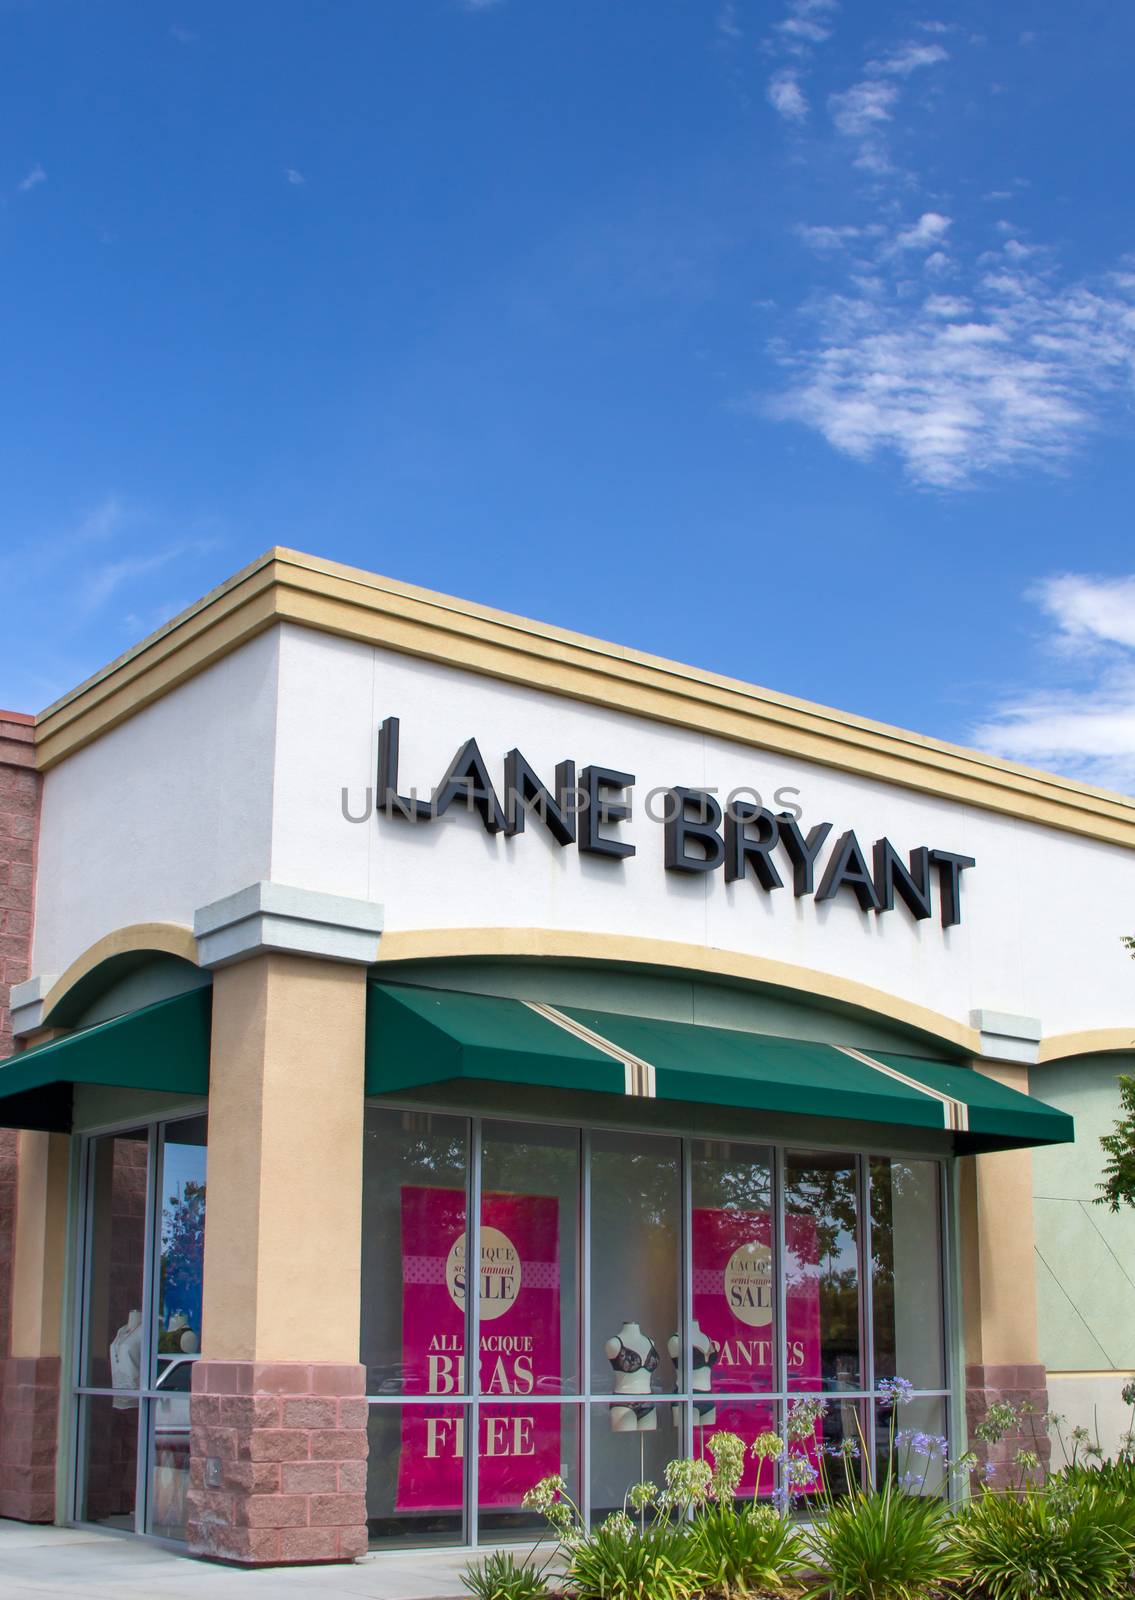 Lane Bryant Store Exterior by wolterk